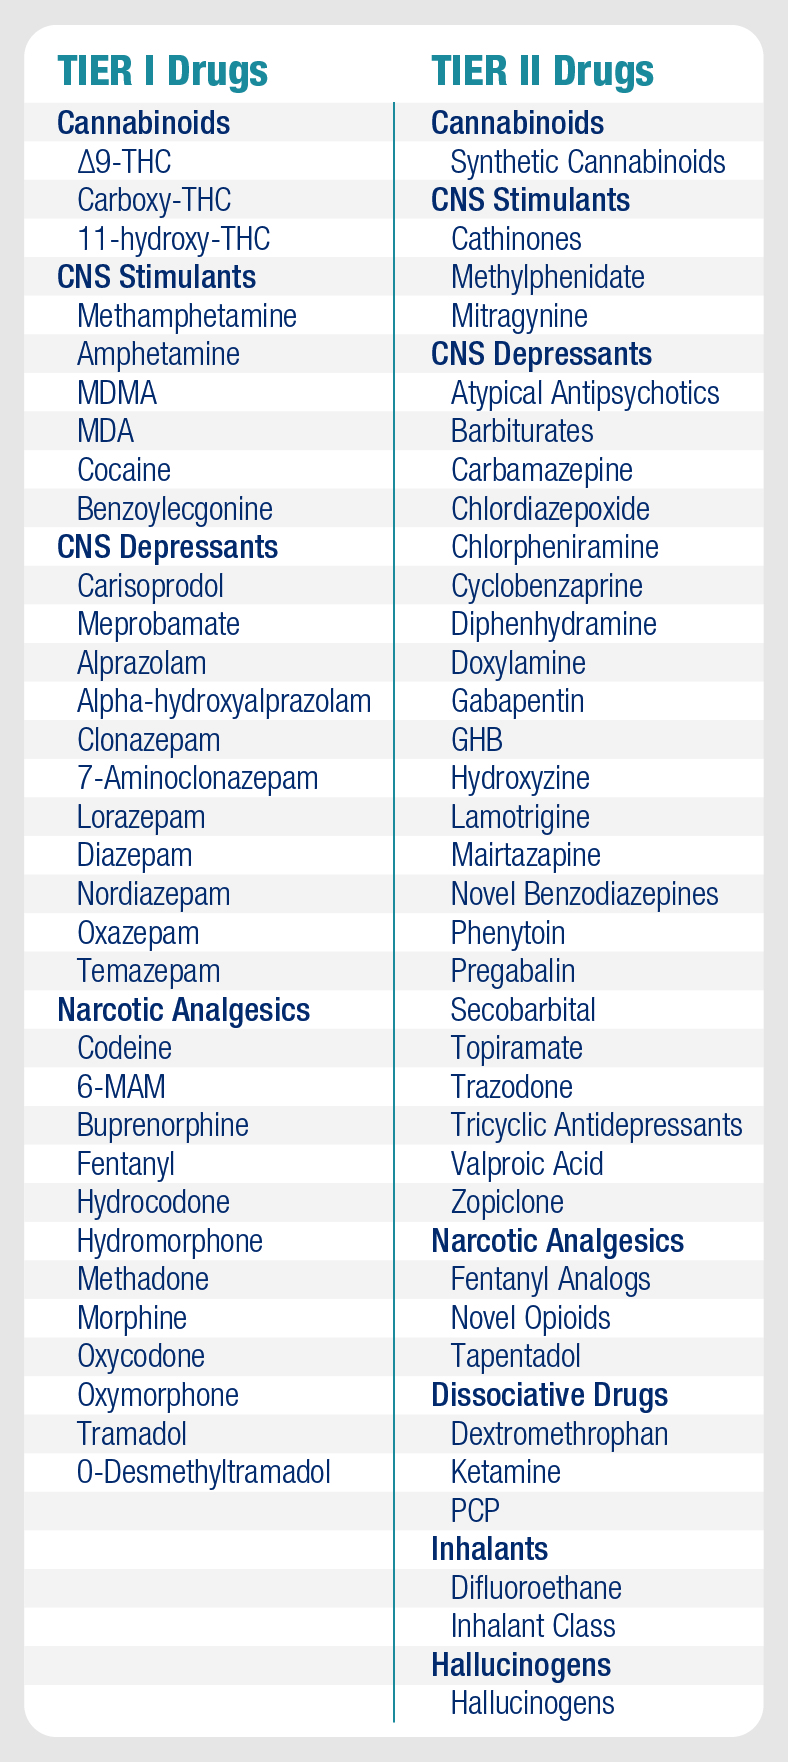 List of Tier I and Tier II drugs. Tier II drugs can be both individually named drugs and classes of drugs (e.g., atypical antipsychotics).